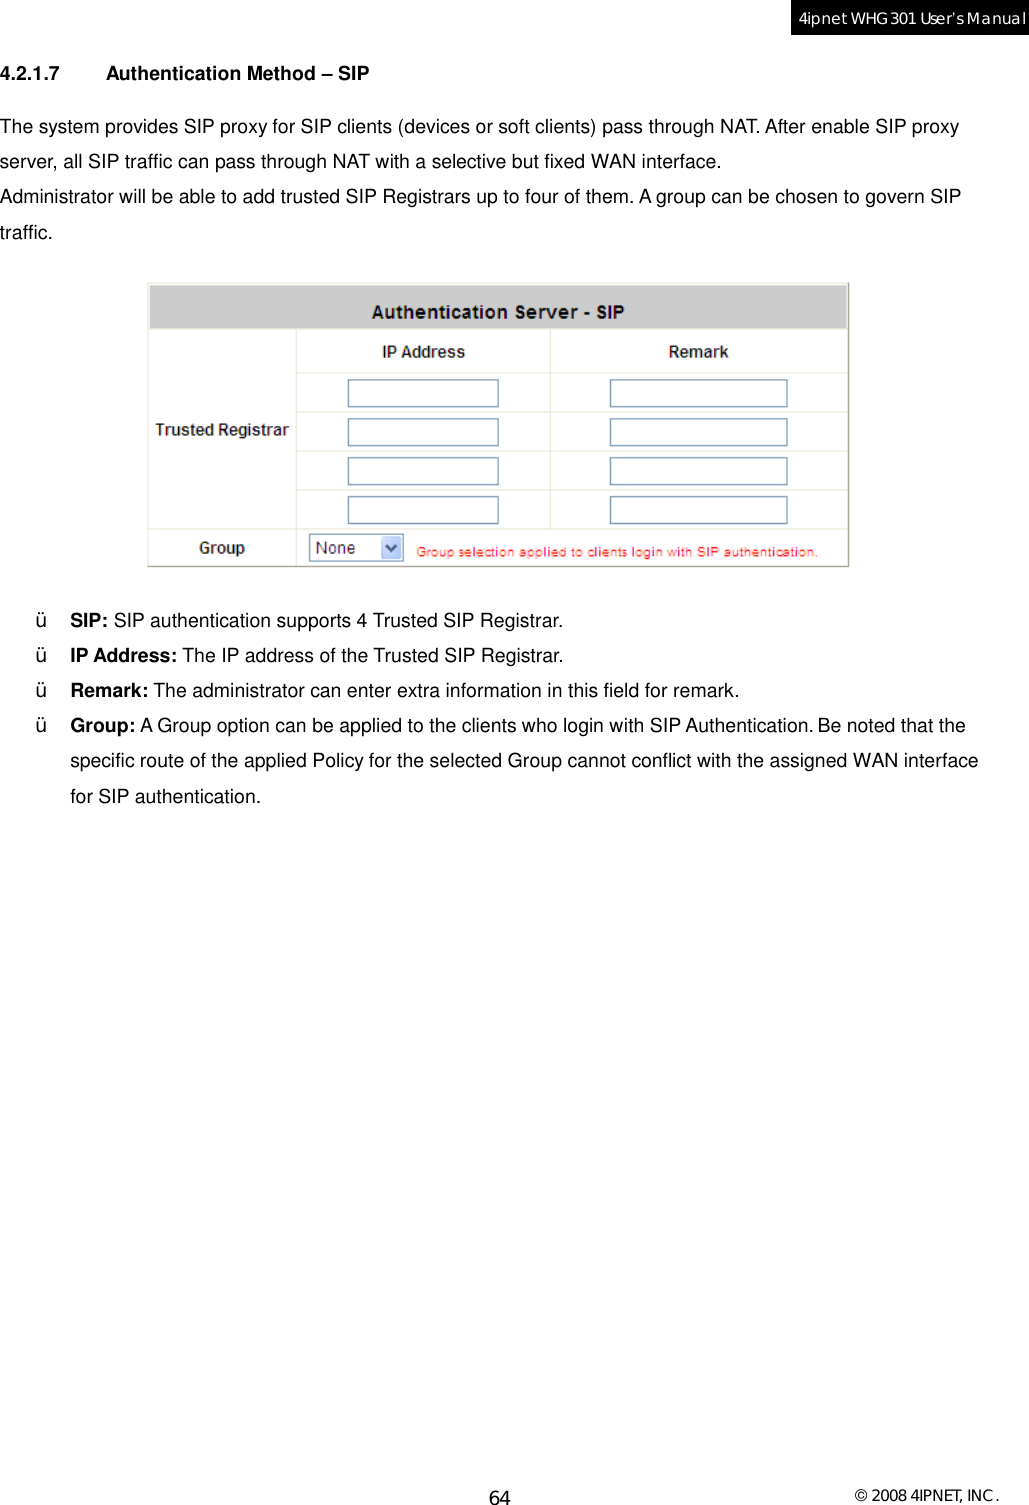  © 2008 4IPNET, INC. 64 4ipnet WHG301 User’s Manual  4.2.1.7 Authentication Method – SIP The system provides SIP proxy for SIP clients (devices or soft clients) pass through NAT. After enable SIP proxy server, all SIP traffic can pass through NAT with a selective but fixed WAN interface. Administrator will be able to add trusted SIP Registrars up to four of them. A group can be chosen to govern SIP traffic.  Ÿ  SIP: SIP authentication supports 4 Trusted SIP Registrar. Ÿ  IP Address: The IP address of the Trusted SIP Registrar. Ÿ  Remark: The administrator can enter extra information in this field for remark. Ÿ  Group: A Group option can be applied to the clients who login with SIP Authentication. Be noted that the specific route of the applied Policy for the selected Group cannot conflict with the assigned WAN interface for SIP authentication.   